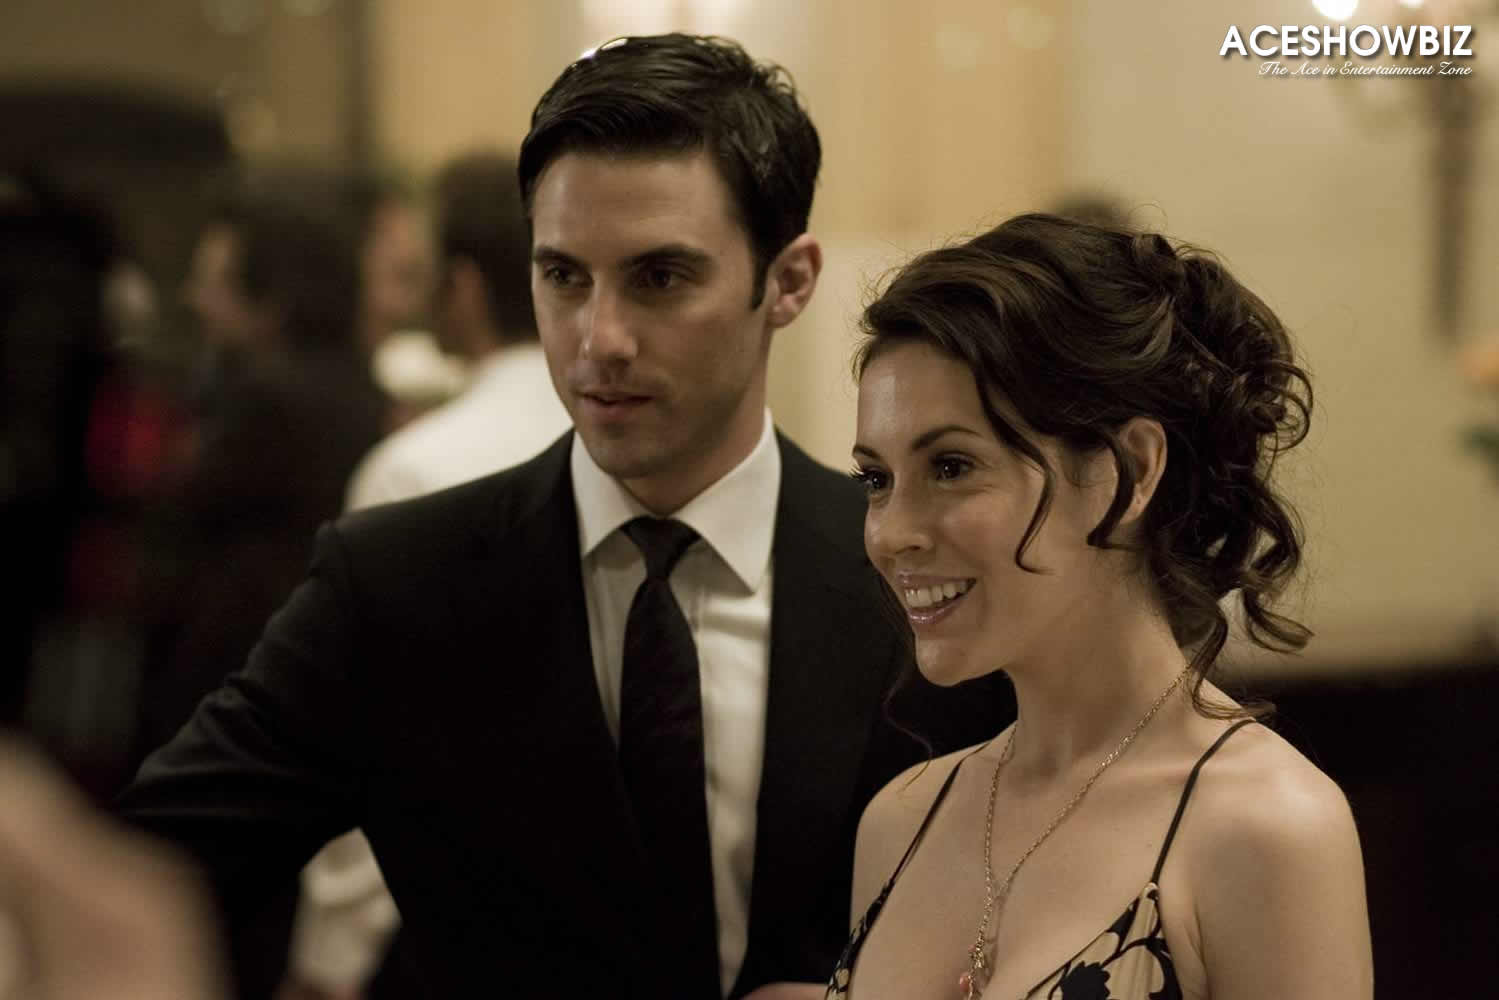 MILO VENTIMIGLIA and ALYSSA MILANO star in the psychological thriller PATHOLOGY, distributed by MGM. Photo credit: Saeed Adyani.